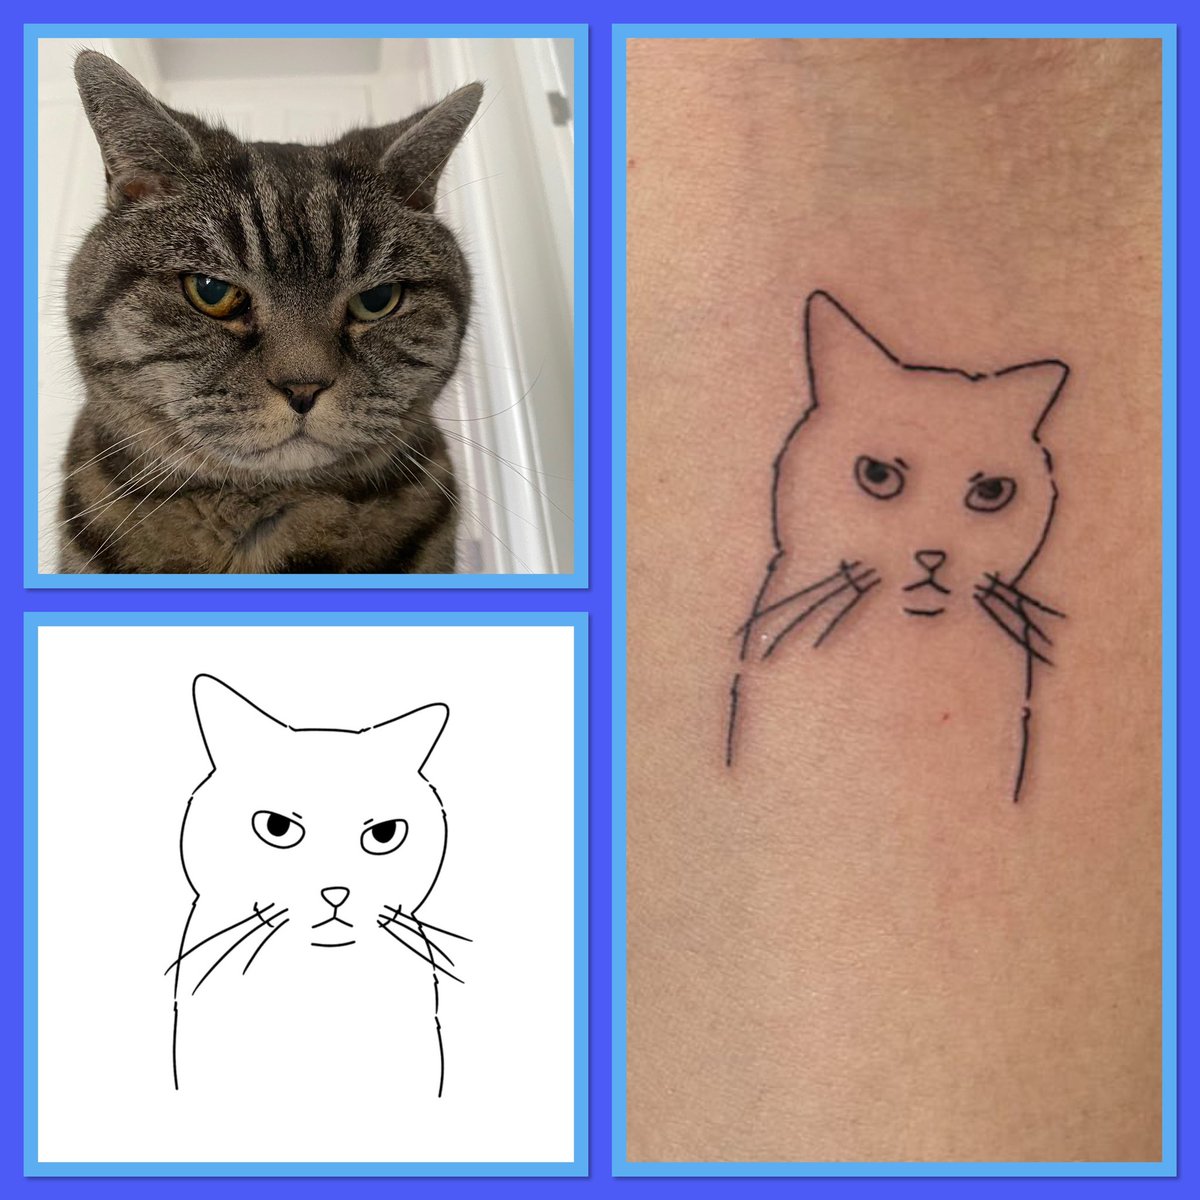 Hello everybody 👋 You all know how very special our beloved Bertie Wooster 💙🌈 was to us & how much our mum still really misses him So she had one of her favourite pics of him drawn by Poorly Drawn Cat & has had it tattooed on her arm 💗🩵♥️